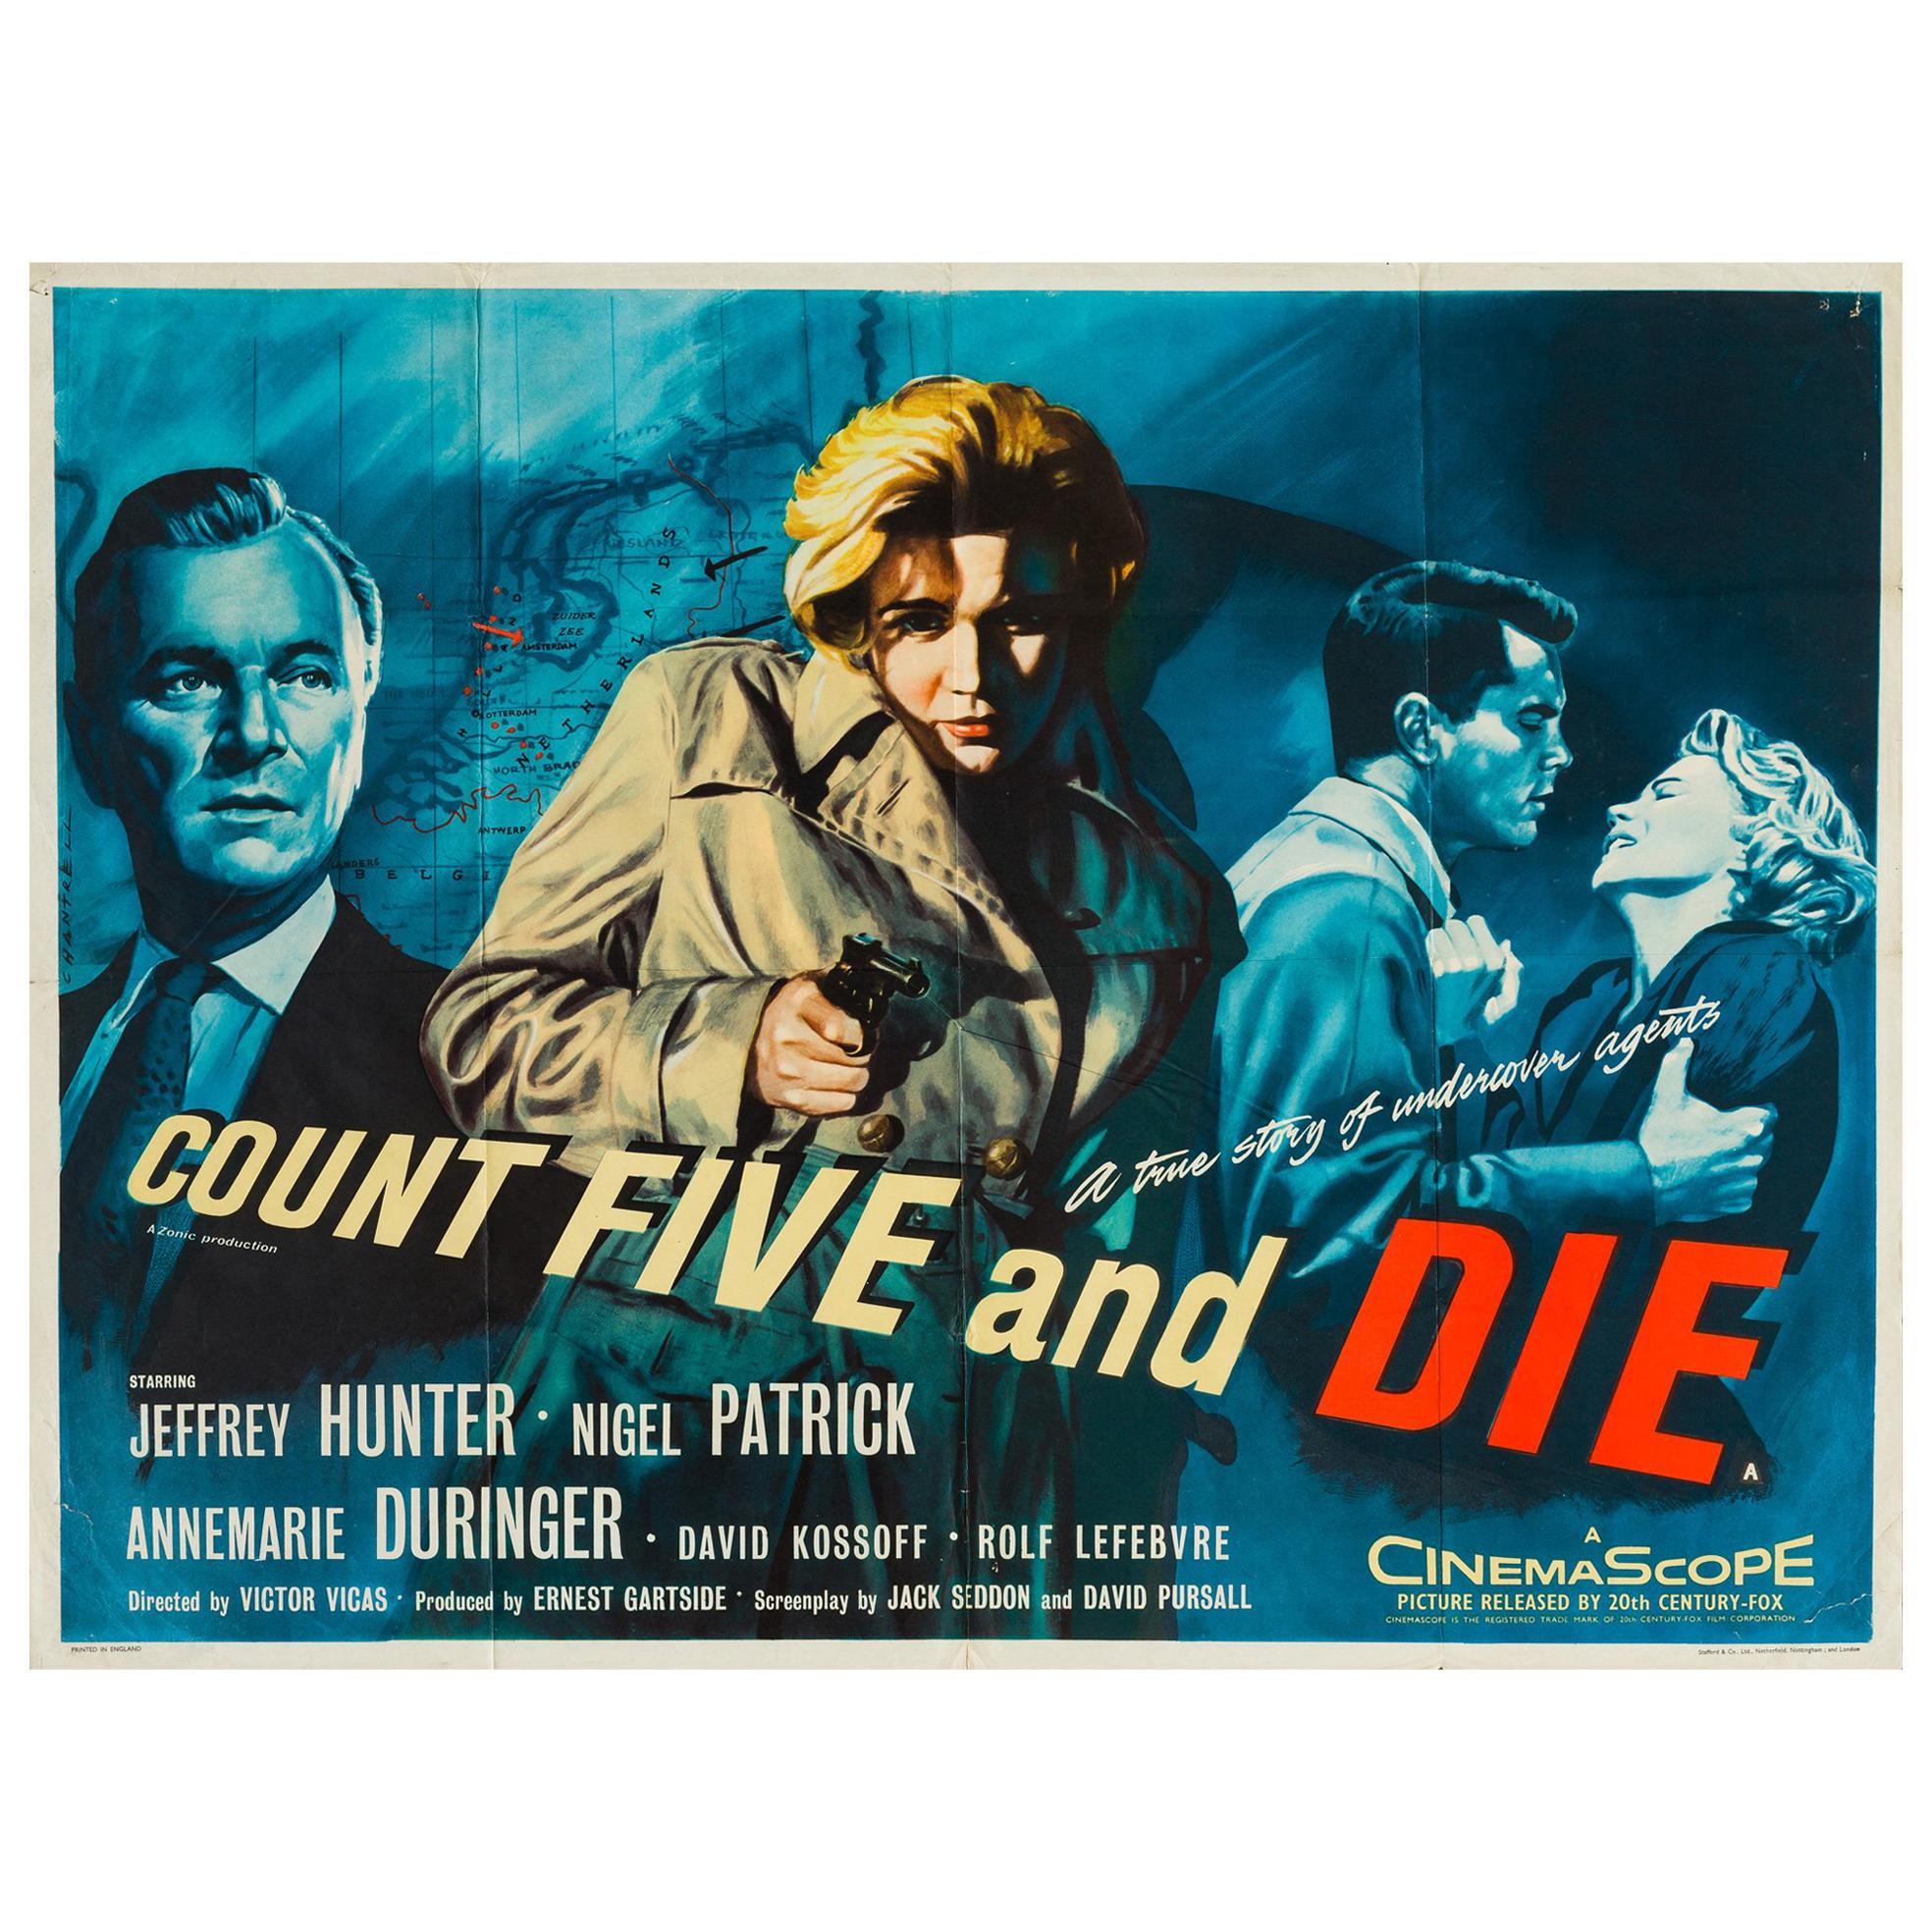 Count Five and Die Original British Film Poster, Chantrell, 1957